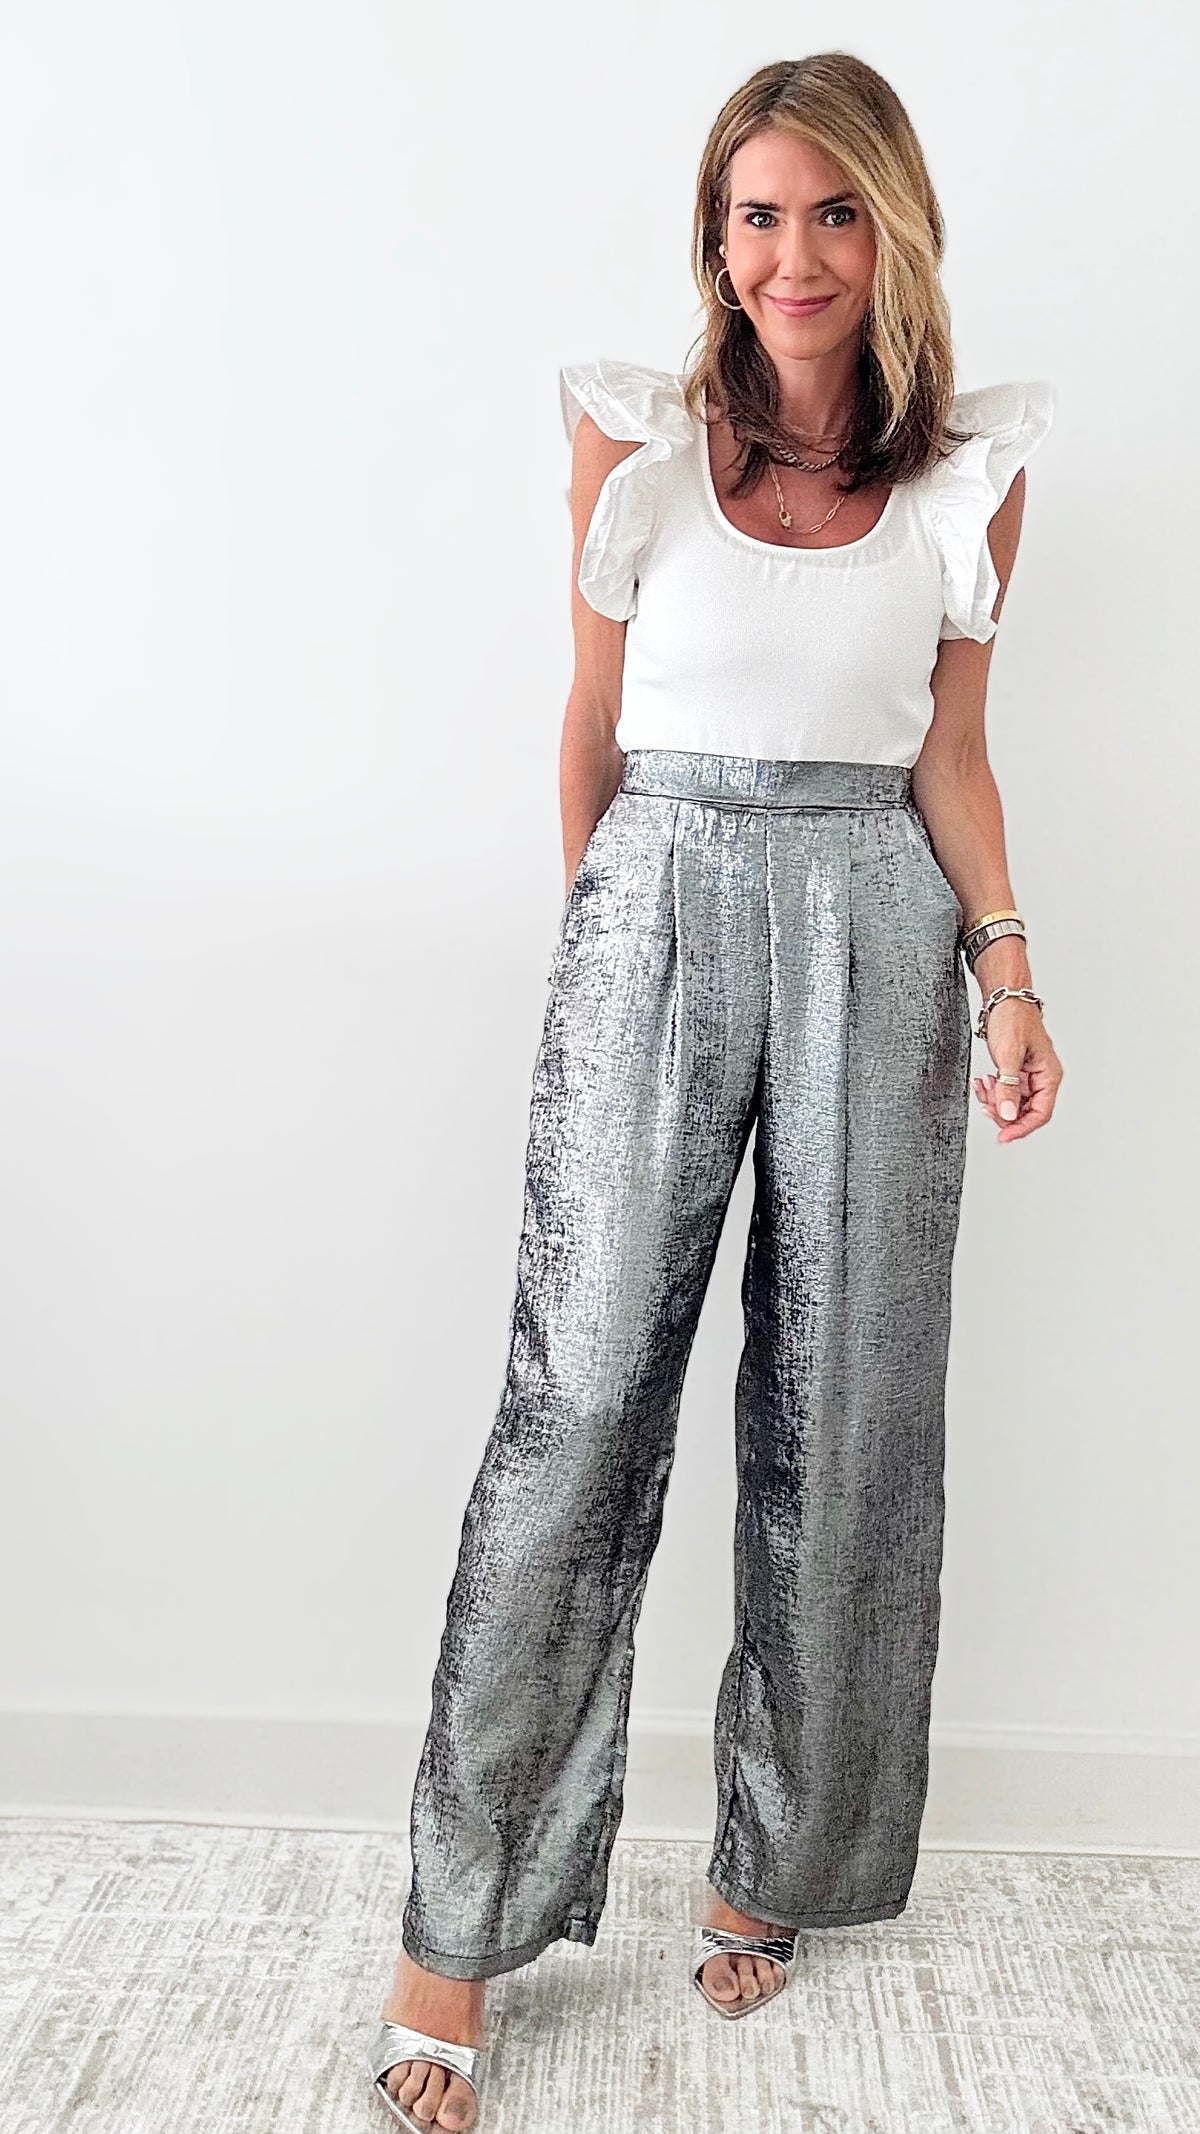 Metallic Wide Leg Pants - Metalic Greey /Black-170 Bottoms-original usa-Coastal Bloom Boutique, find the trendiest versions of the popular styles and looks Located in Indialantic, FL